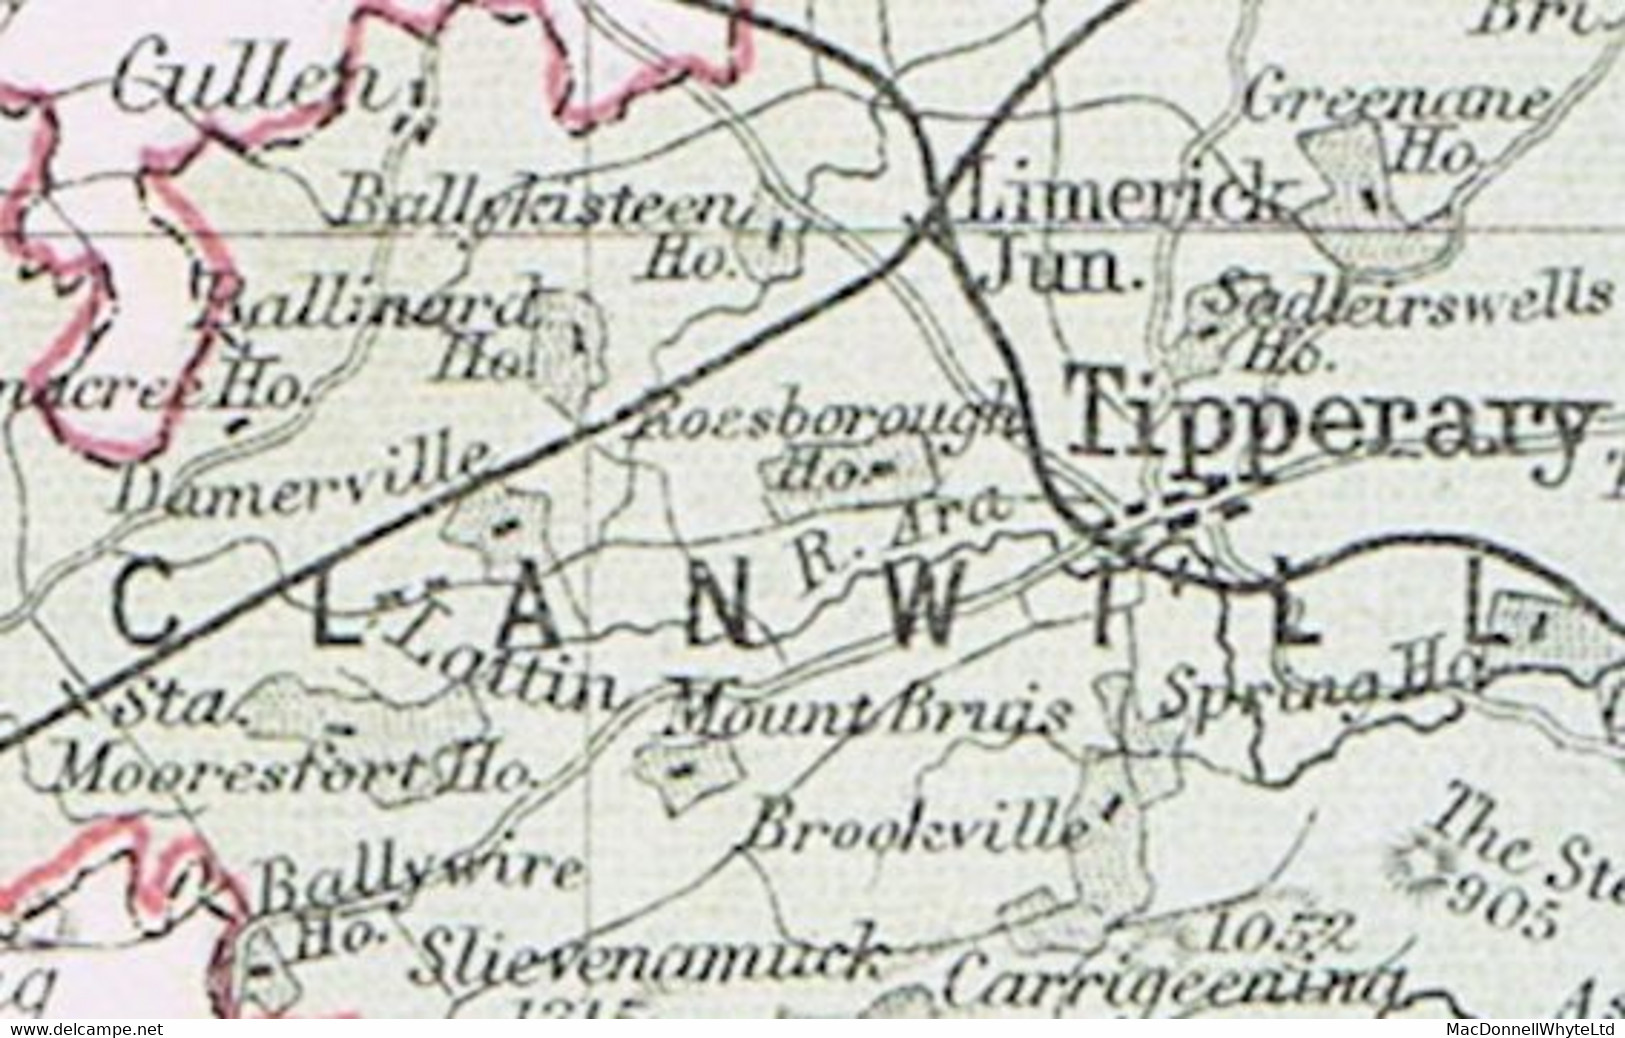 Ireland Hospital Tipperary 1838 Letter Ballywire 7 Decr To The Blue-coat Hospital Dublin With Boxed PAID AT/TIPPERARY - Vorphilatelie